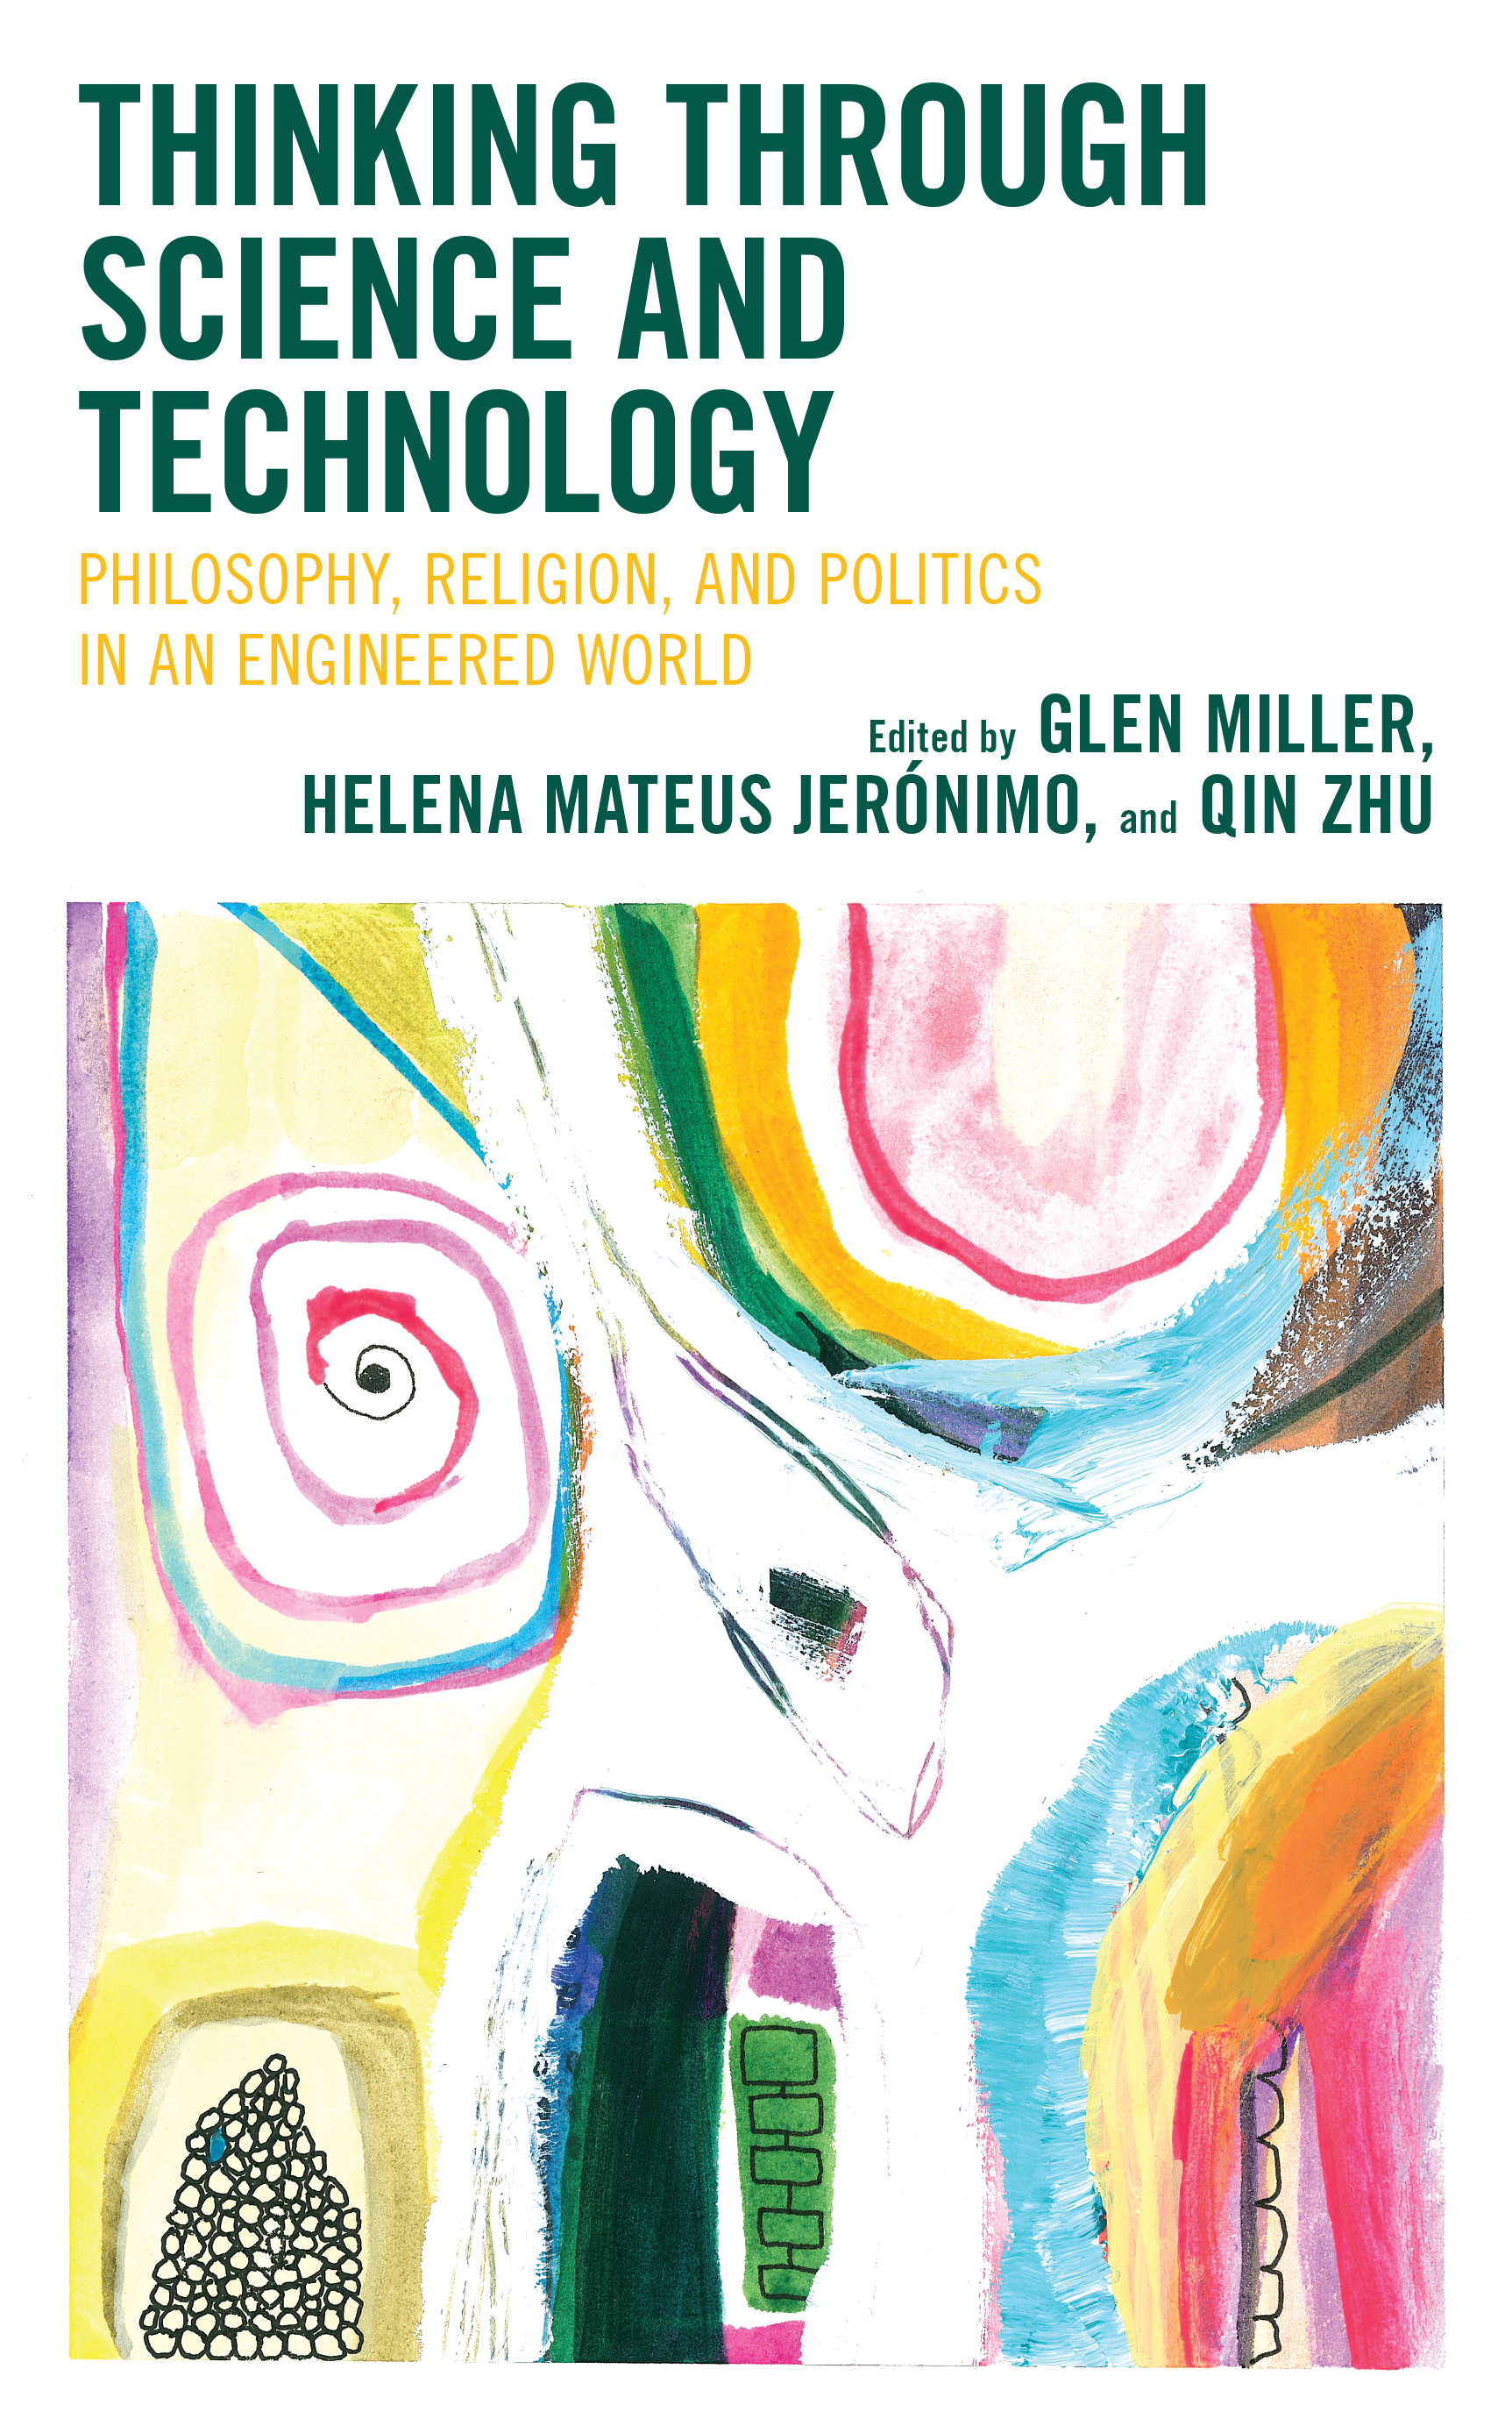 Thinking through Science and Technology: Philosophy, Religion, and Politics in an Engineered World